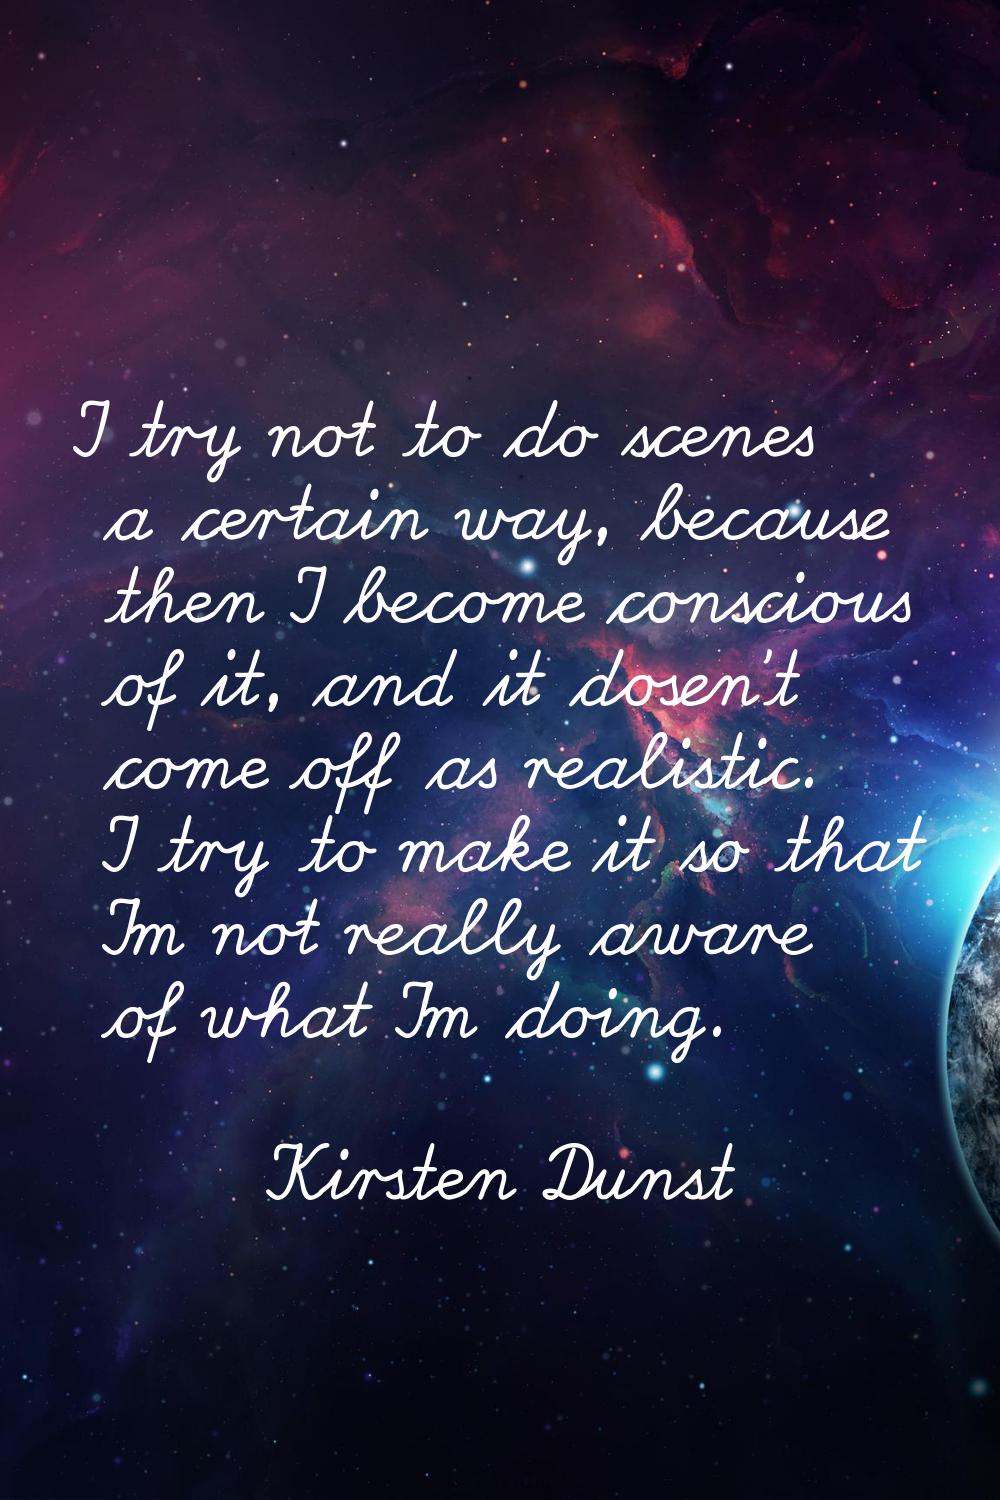 I try not to do scenes a certain way, because then I become conscious of it, and it dosen't come of